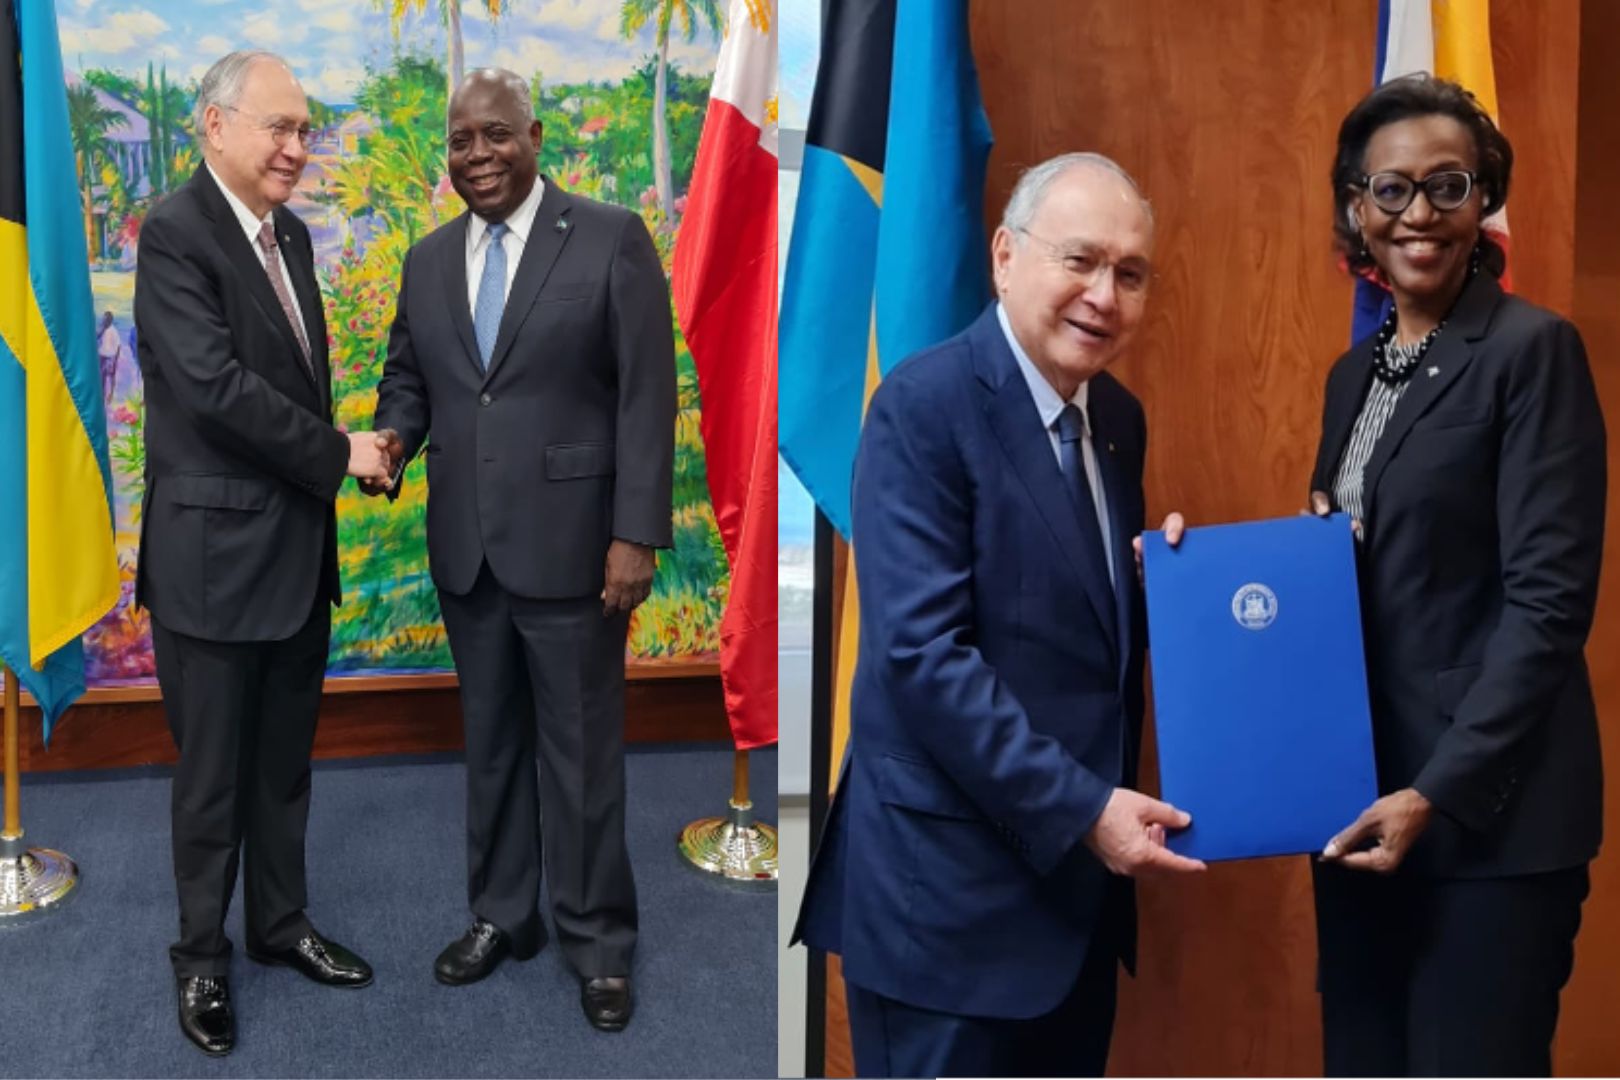 Ambassador Romualdez meets with Prime Minister Philip Davis (left photo) and Director General of the Ministry of Foreign Affairs Rhoda Jackson (right photo) while in Nassau 